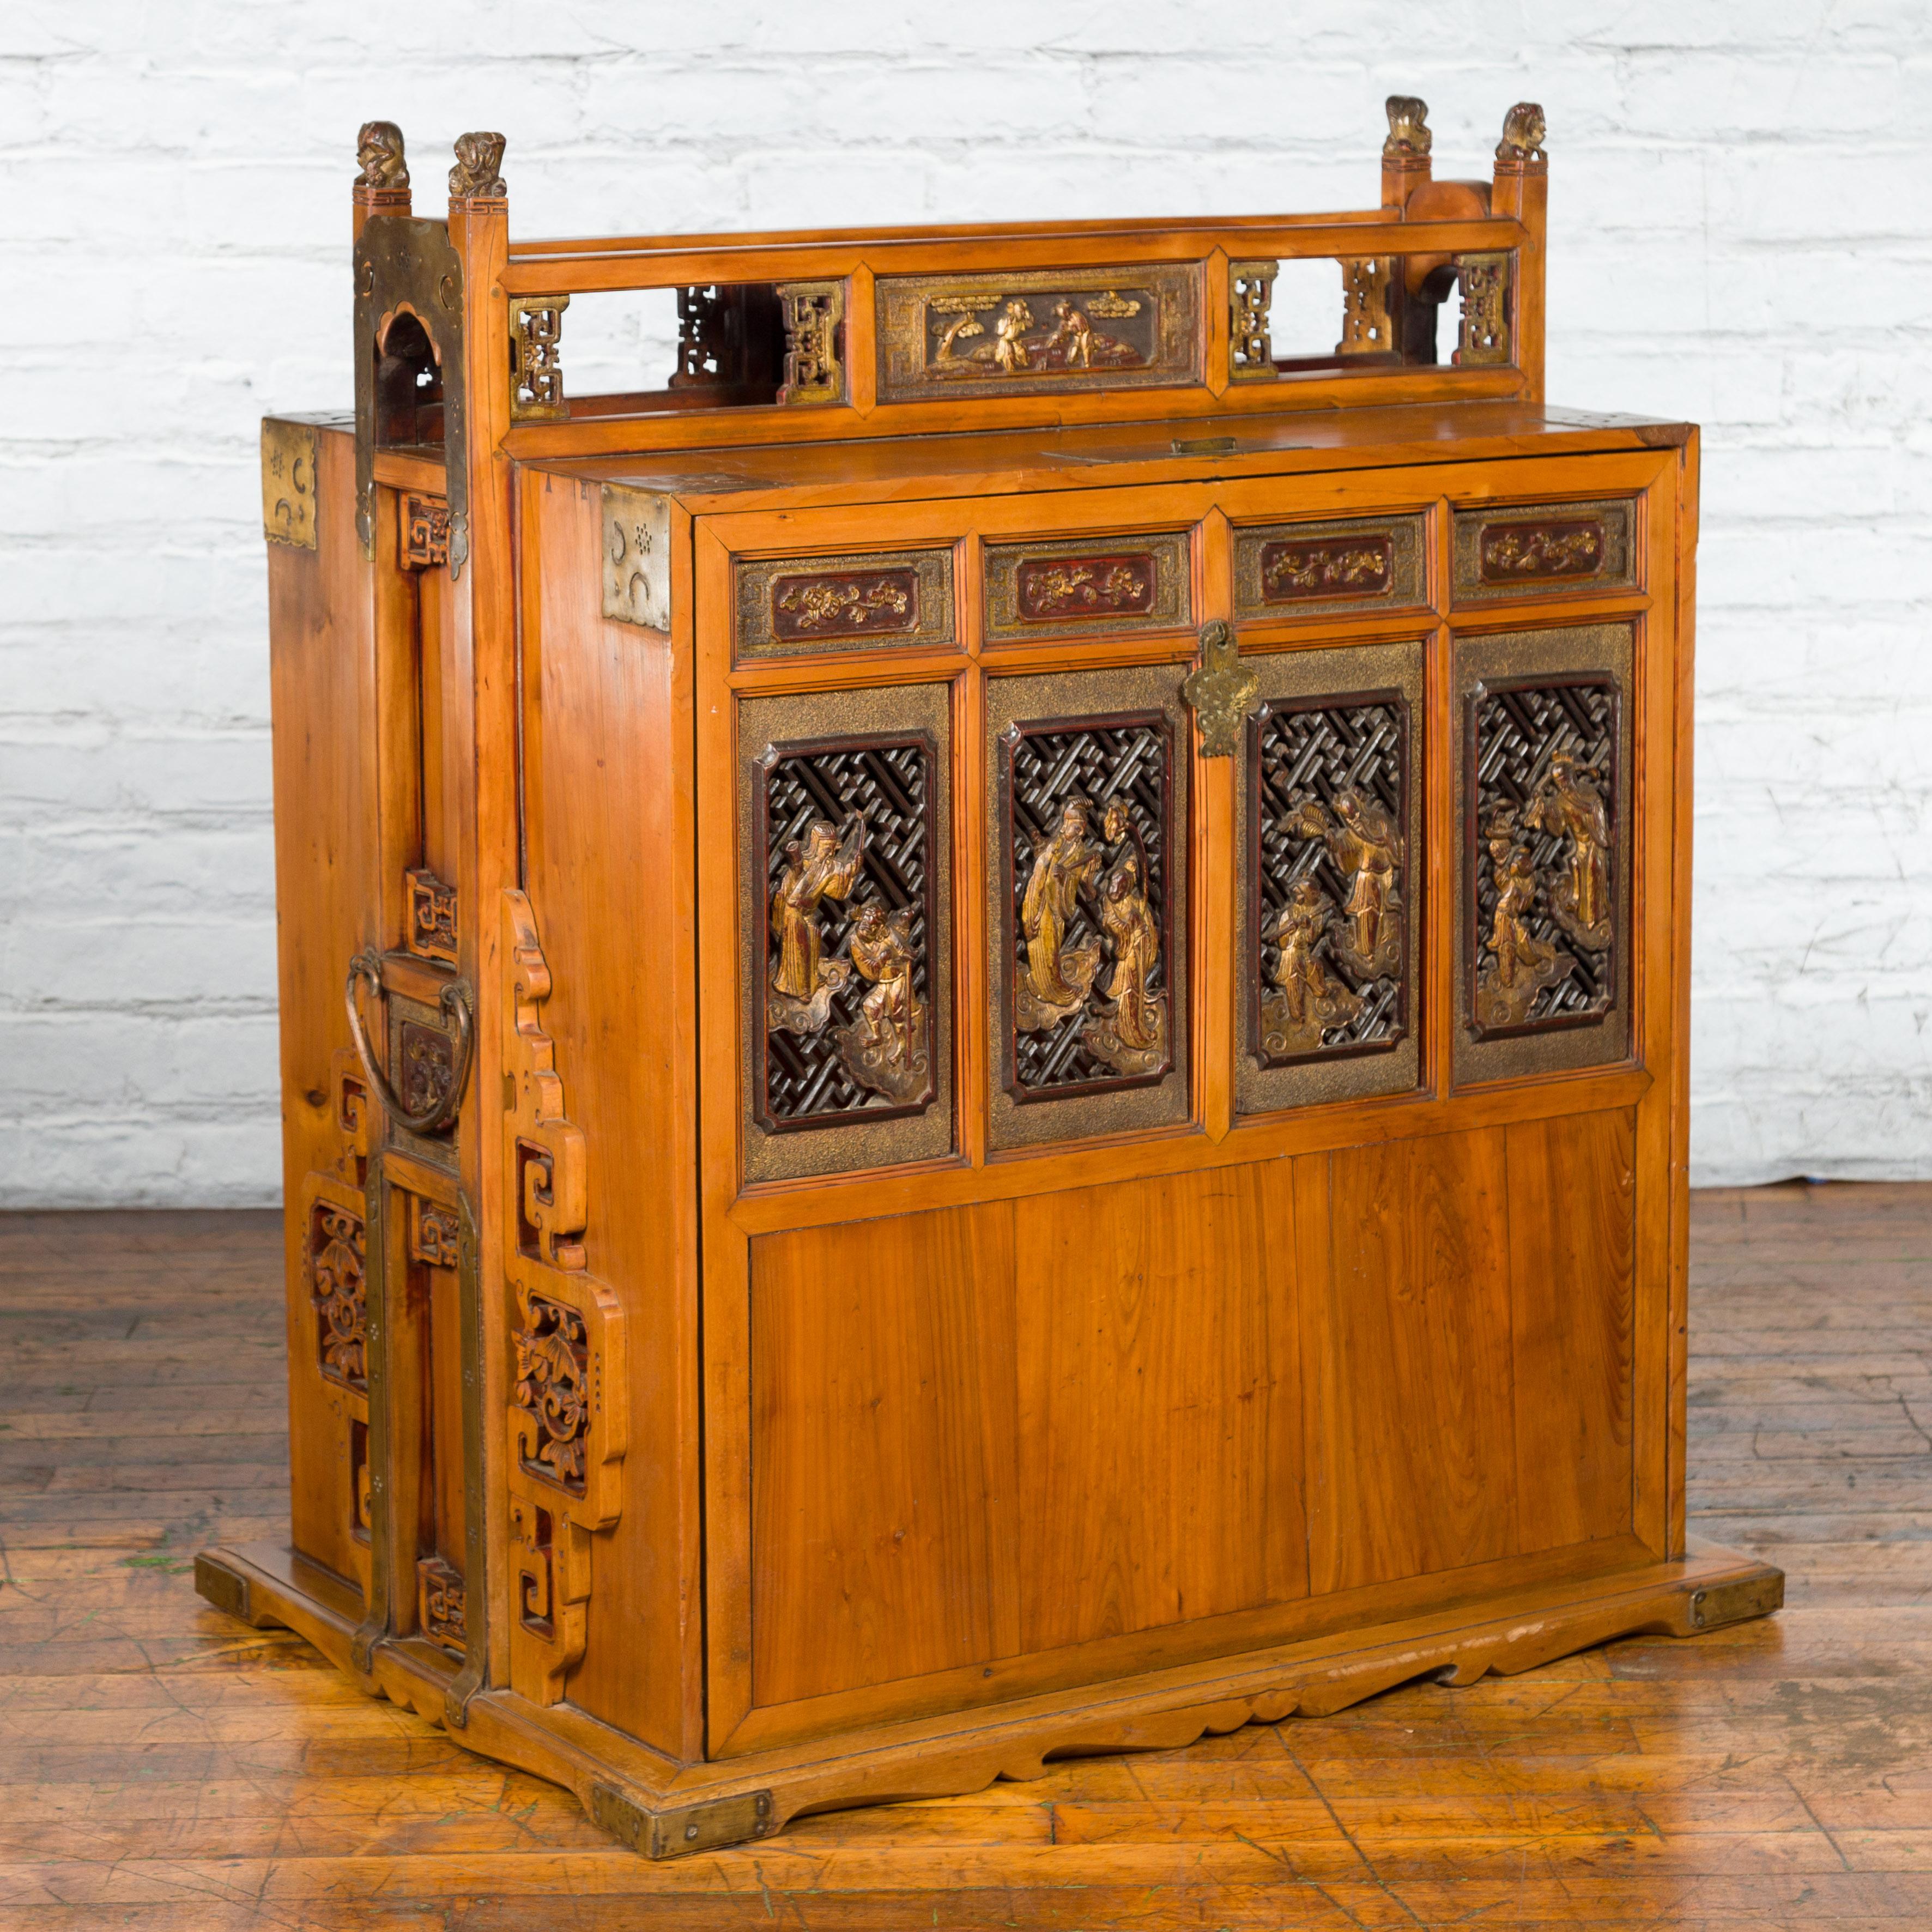 A Chinese Qing Dynasty period dowry chest from the 19th century, with fretwork, carved giltwood characters and brass ornaments. Created in China during the Qing Dynasty, this dowry chest features a linear wooden structure, beautifully accented with